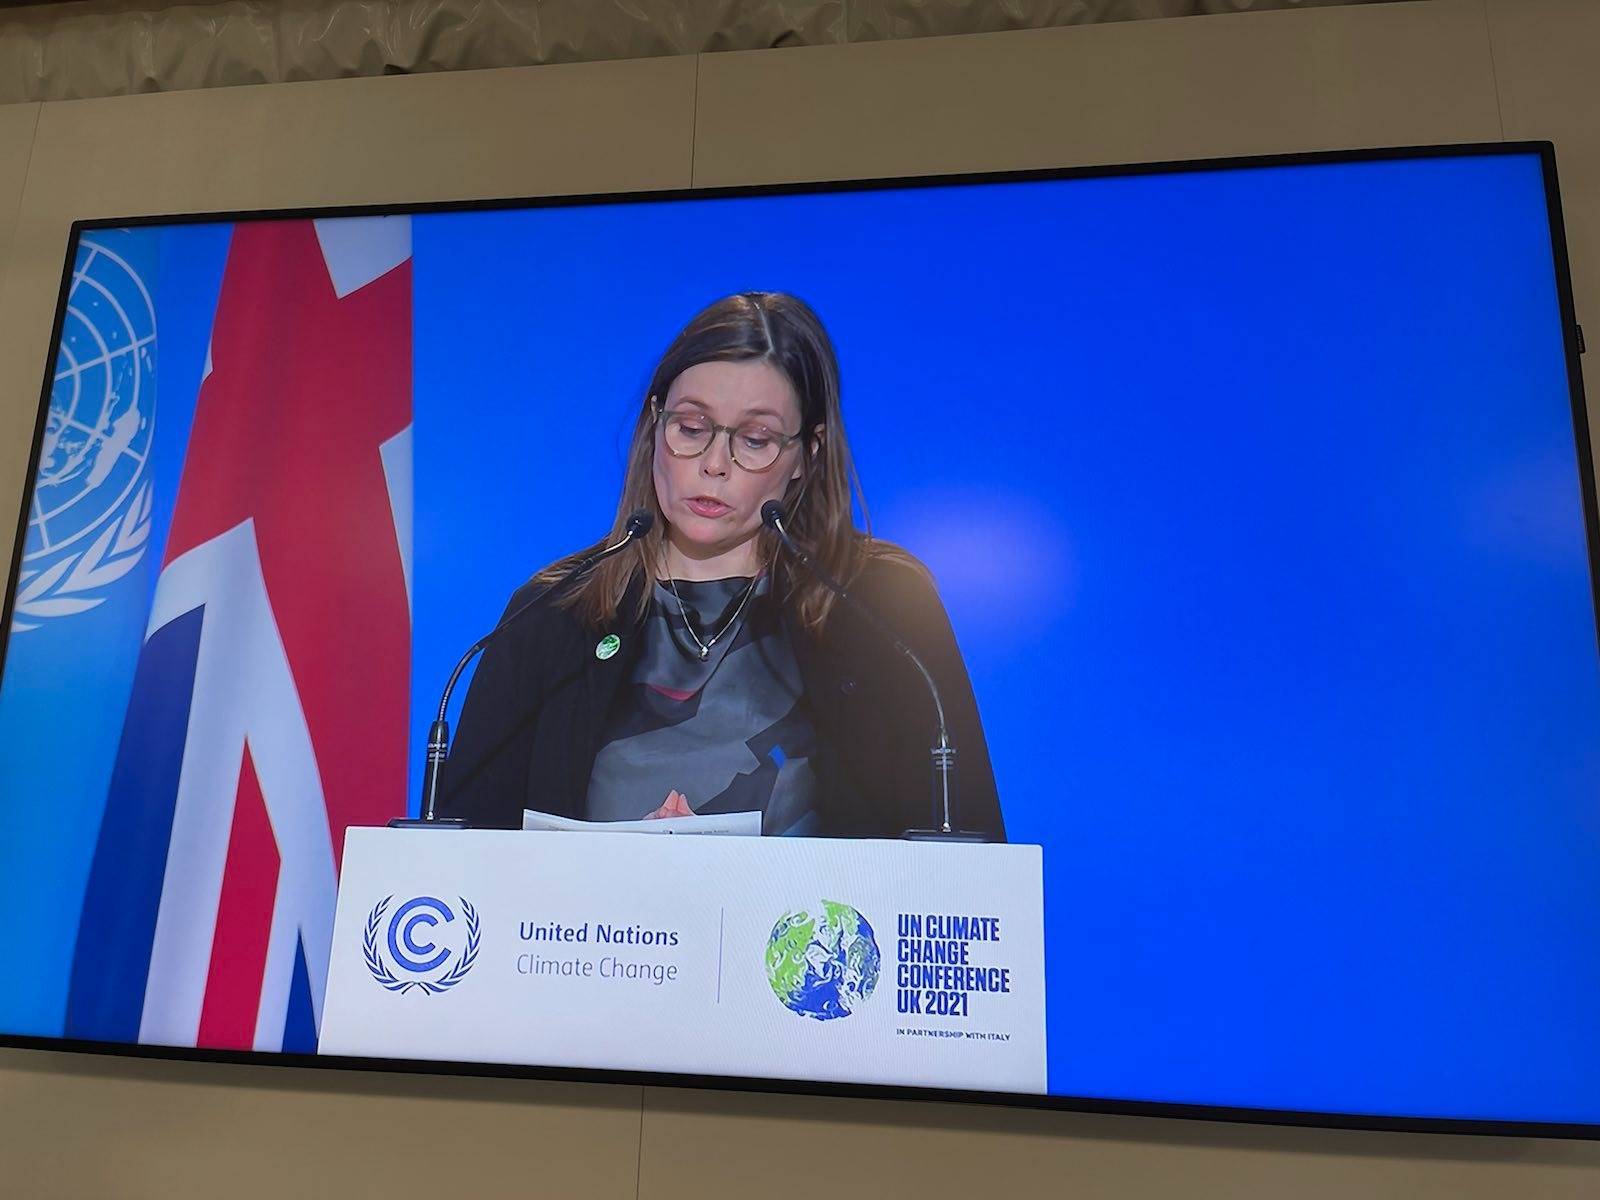 Iceland‘s message at COP26: We need to upgrade our pledges - mynd